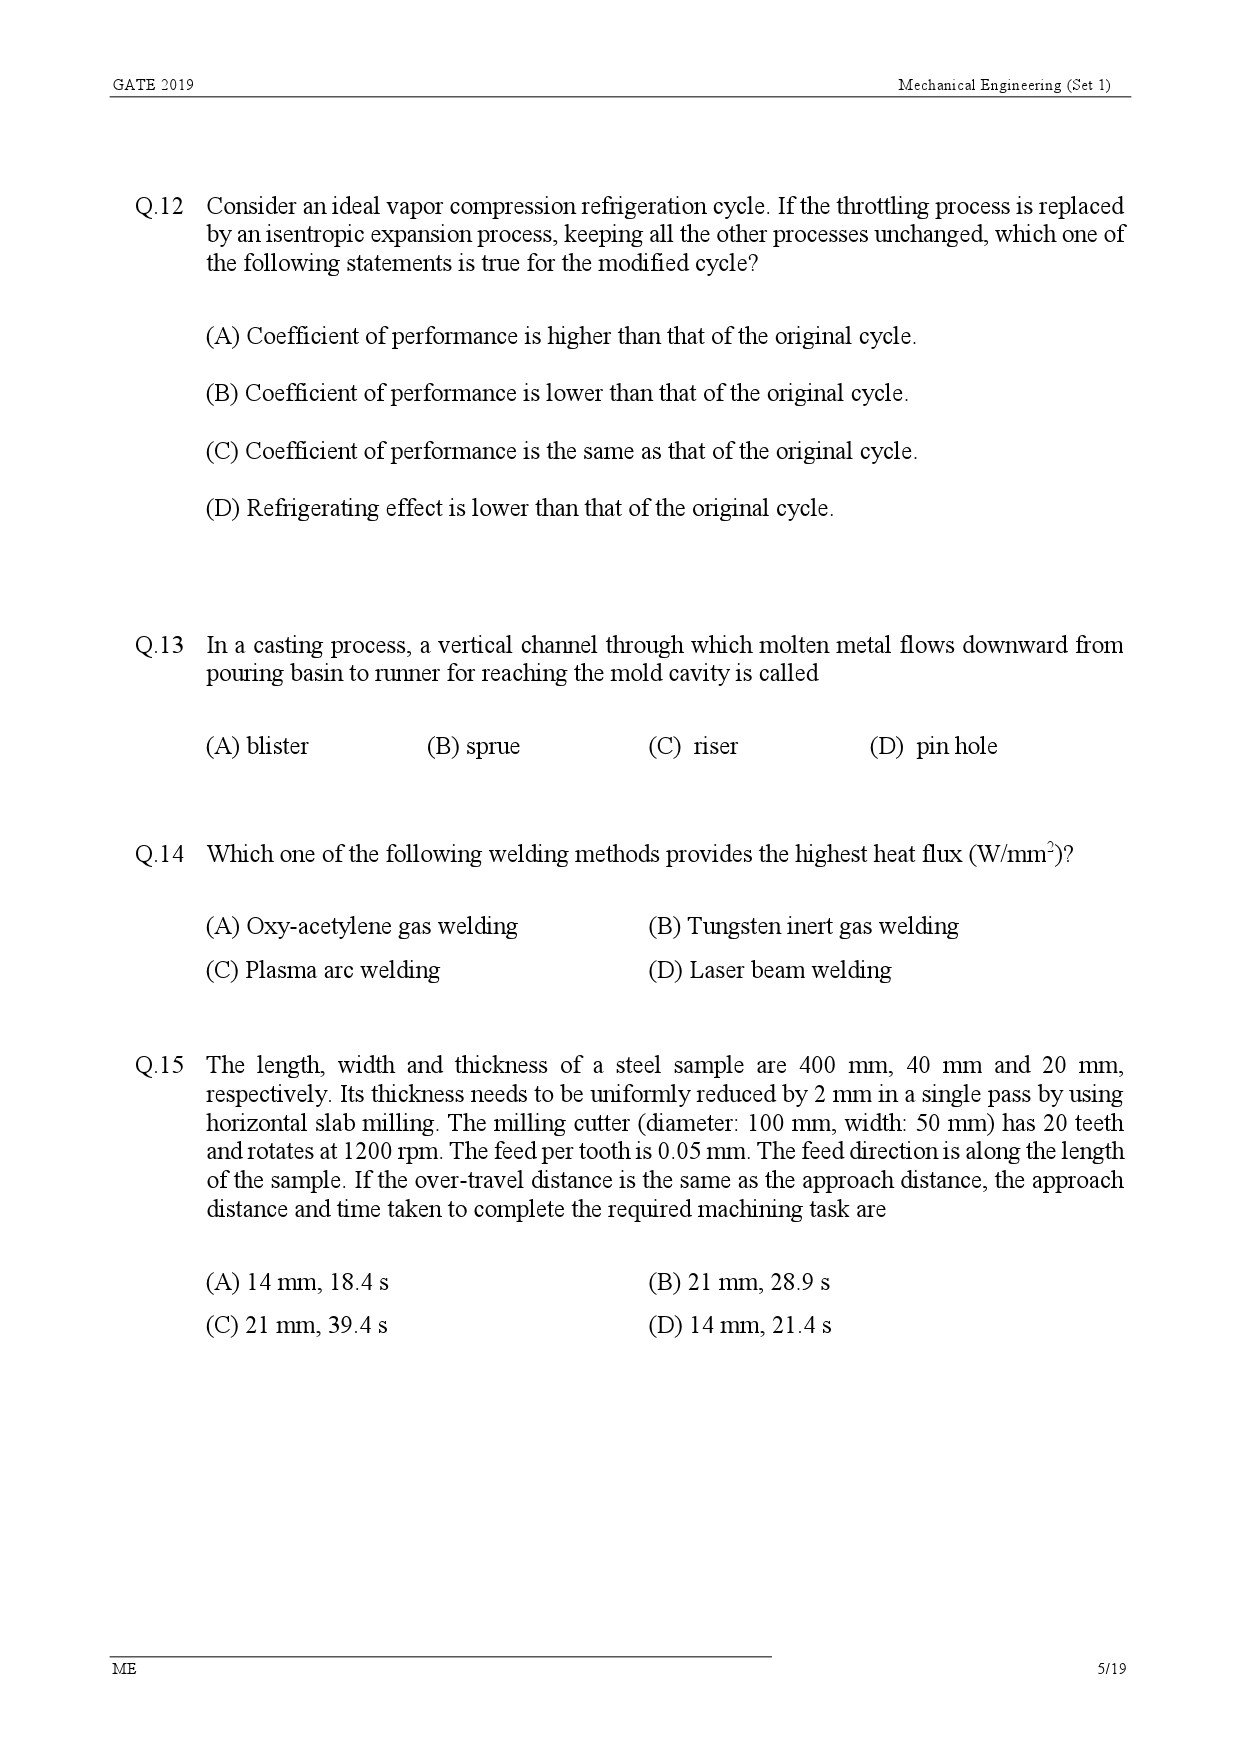 GATE Exam Question Paper 2019 Mechanical Engineering Set 1 8